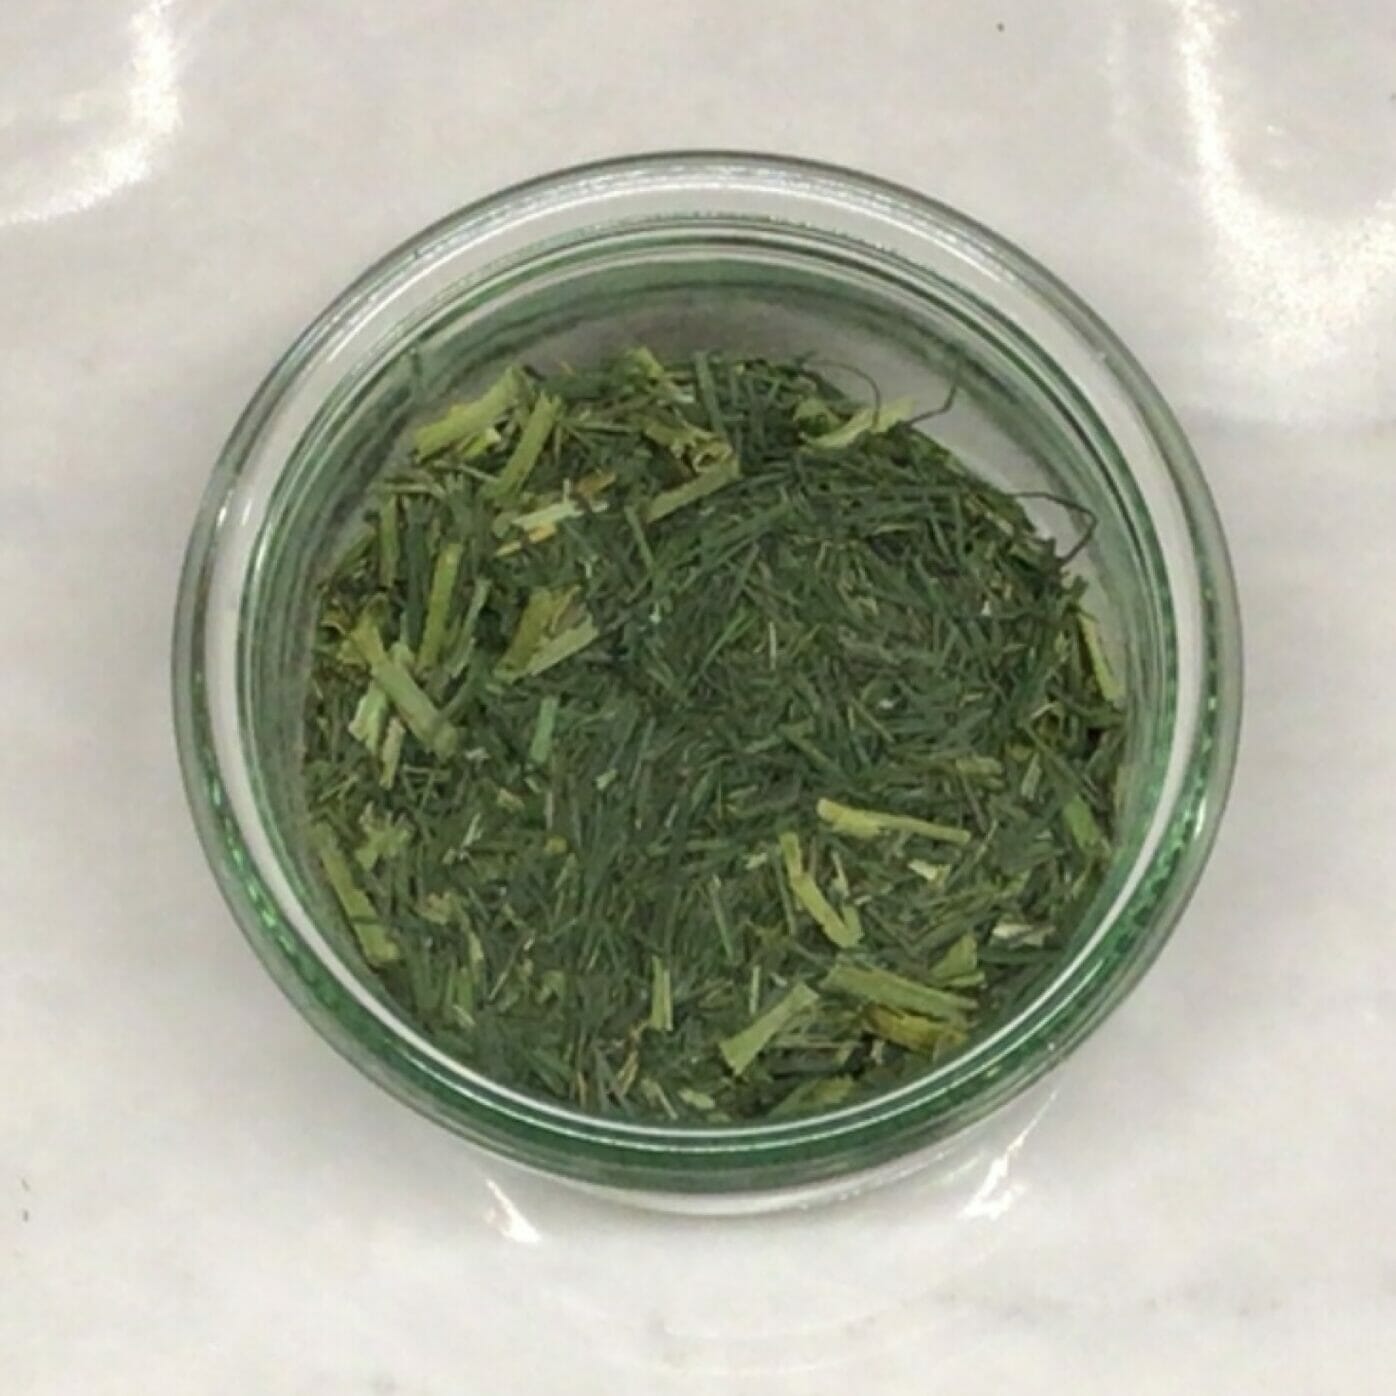 house dried chives in a glass jar sold by weight zero waste plastic-free for refills in your own container